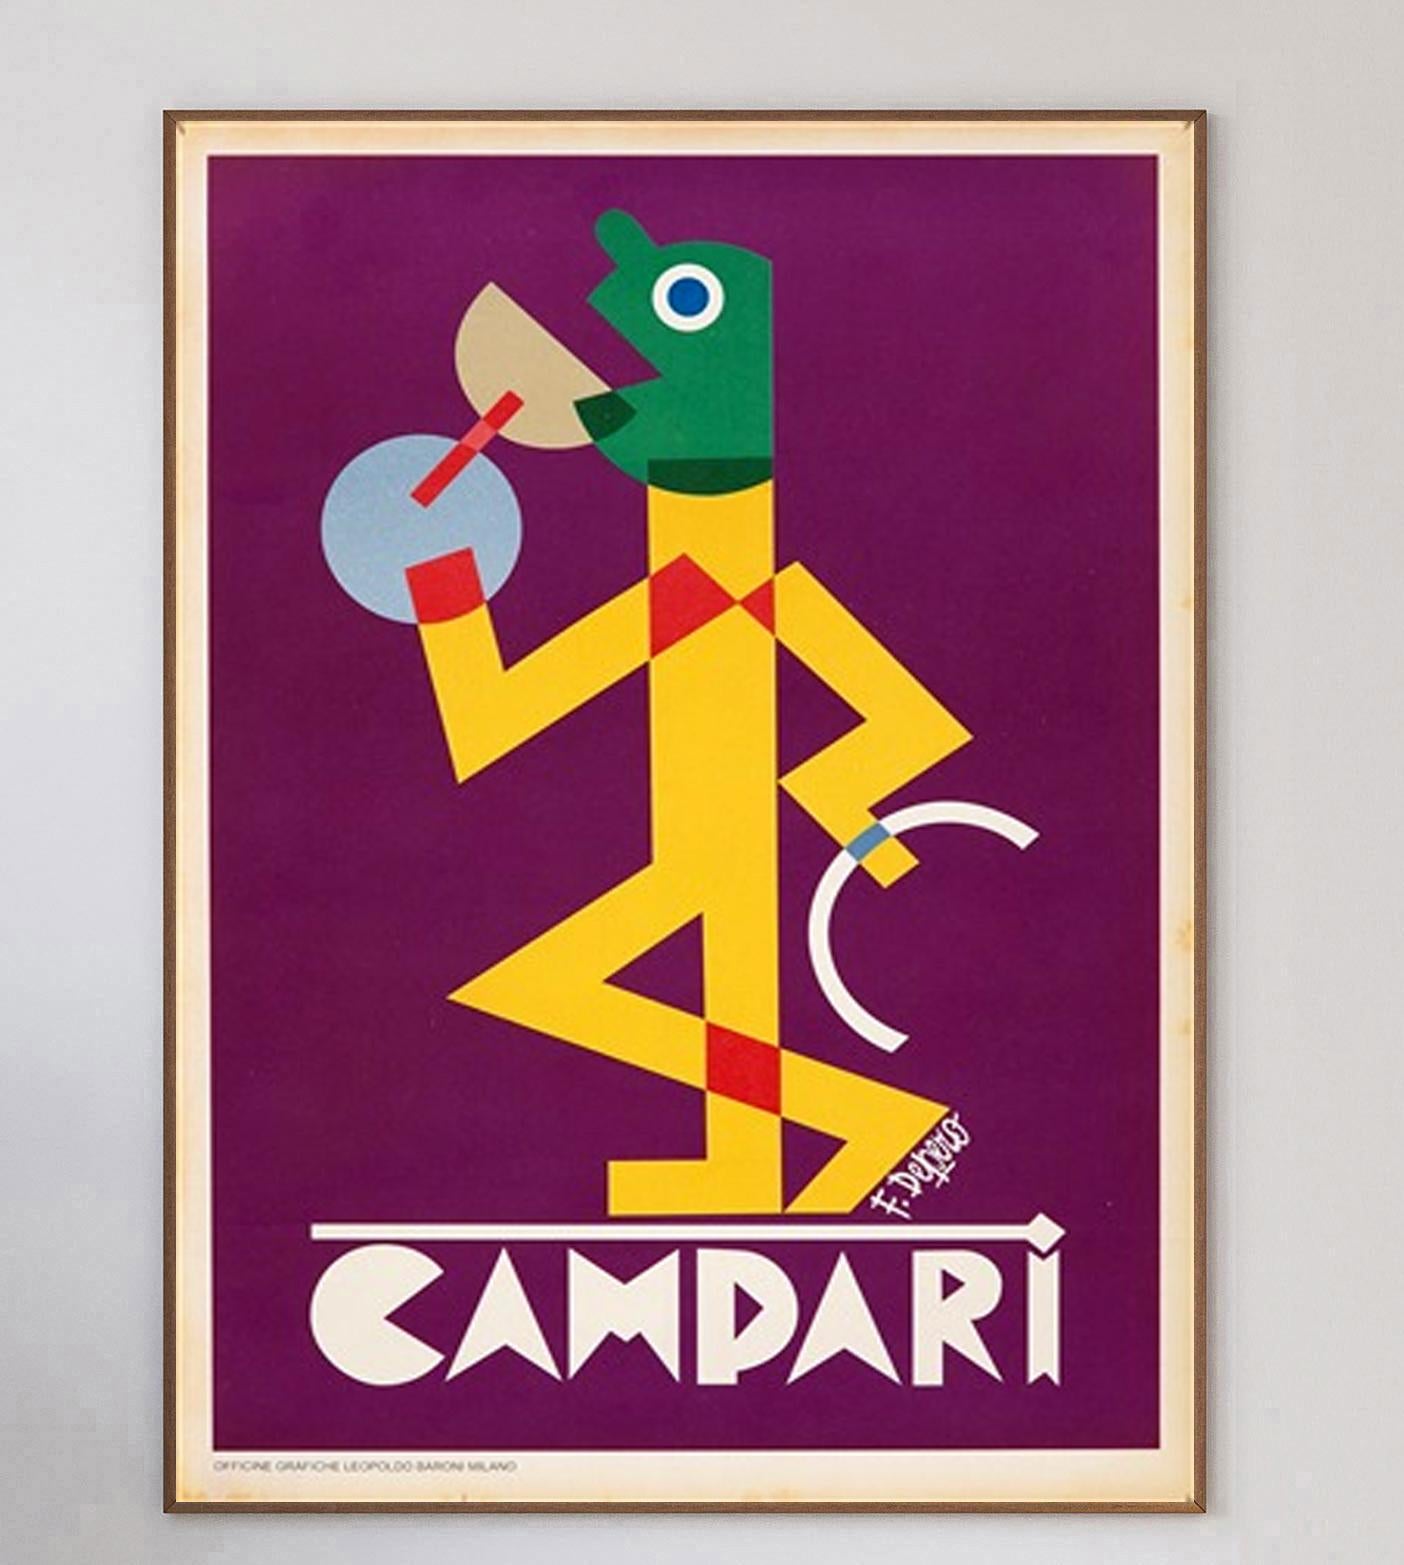 Iconic Italian liqueur brand Campari collaborated with Futurist artist Fortunato Depero many times, beginning their relationship in 1924.

Campari was formed in 1860 by Gaspare Campari and the aperitif is as popular today as ever. His son, Davide